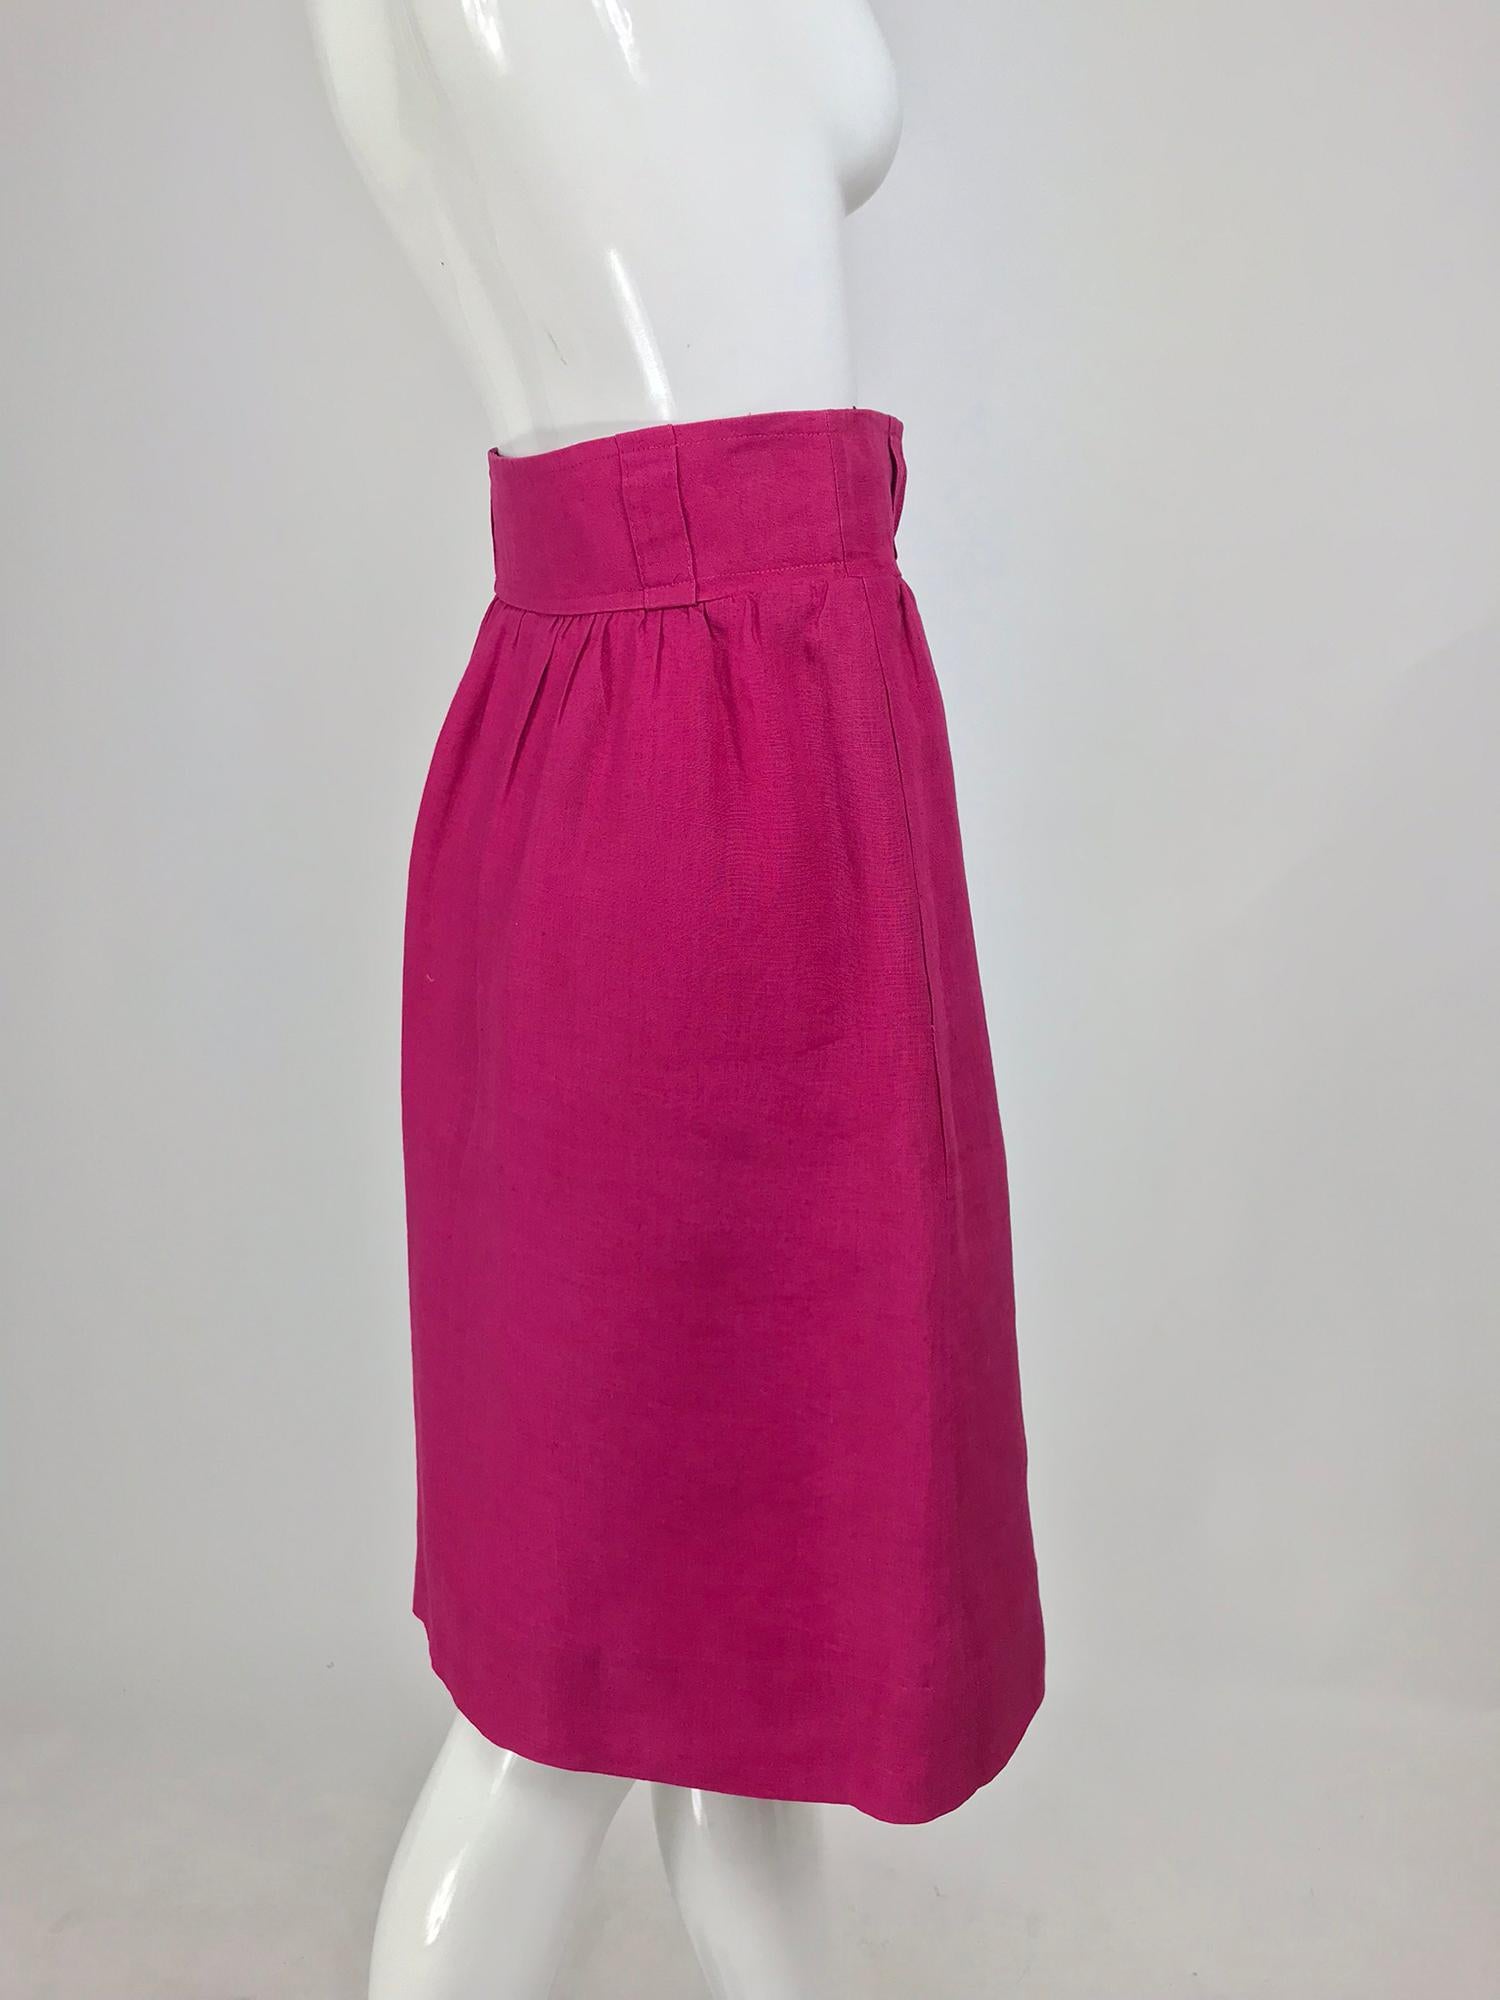 Givenchy Hot Pink Linen Skirt 1980s 1